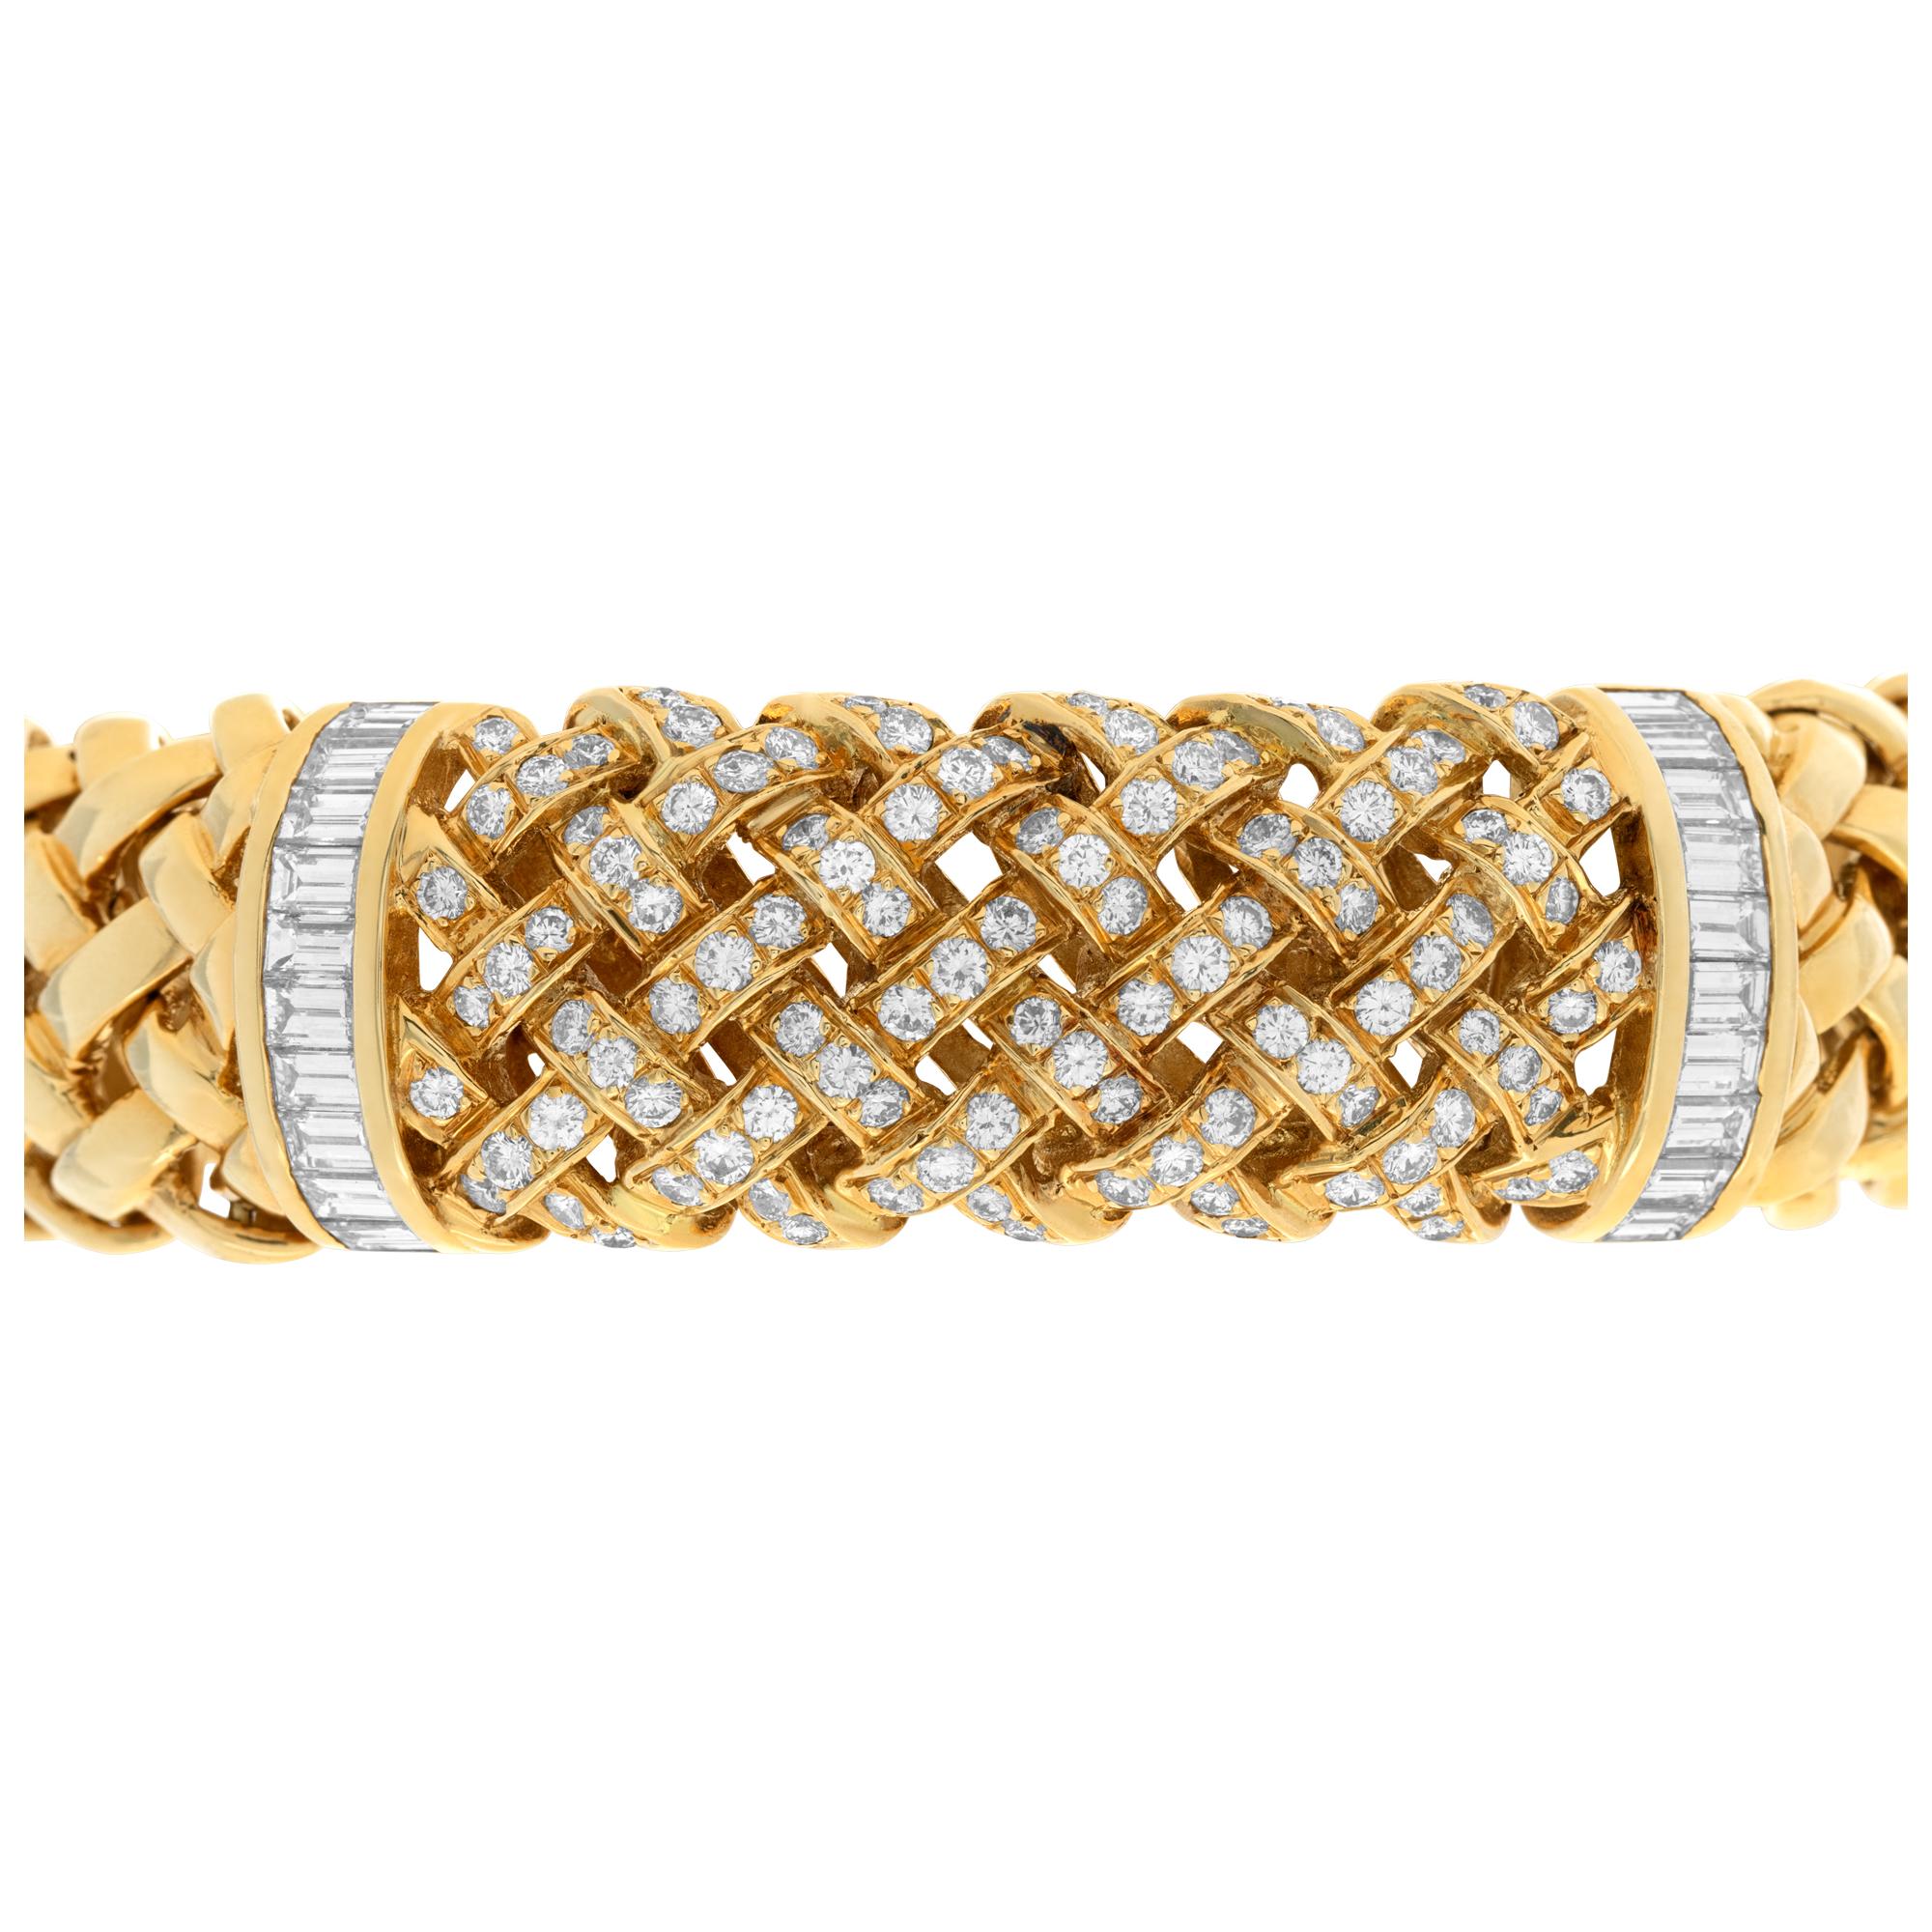 Women's Tiffany & Co. VANNERIE Collection bracelet in 18K yellow gold